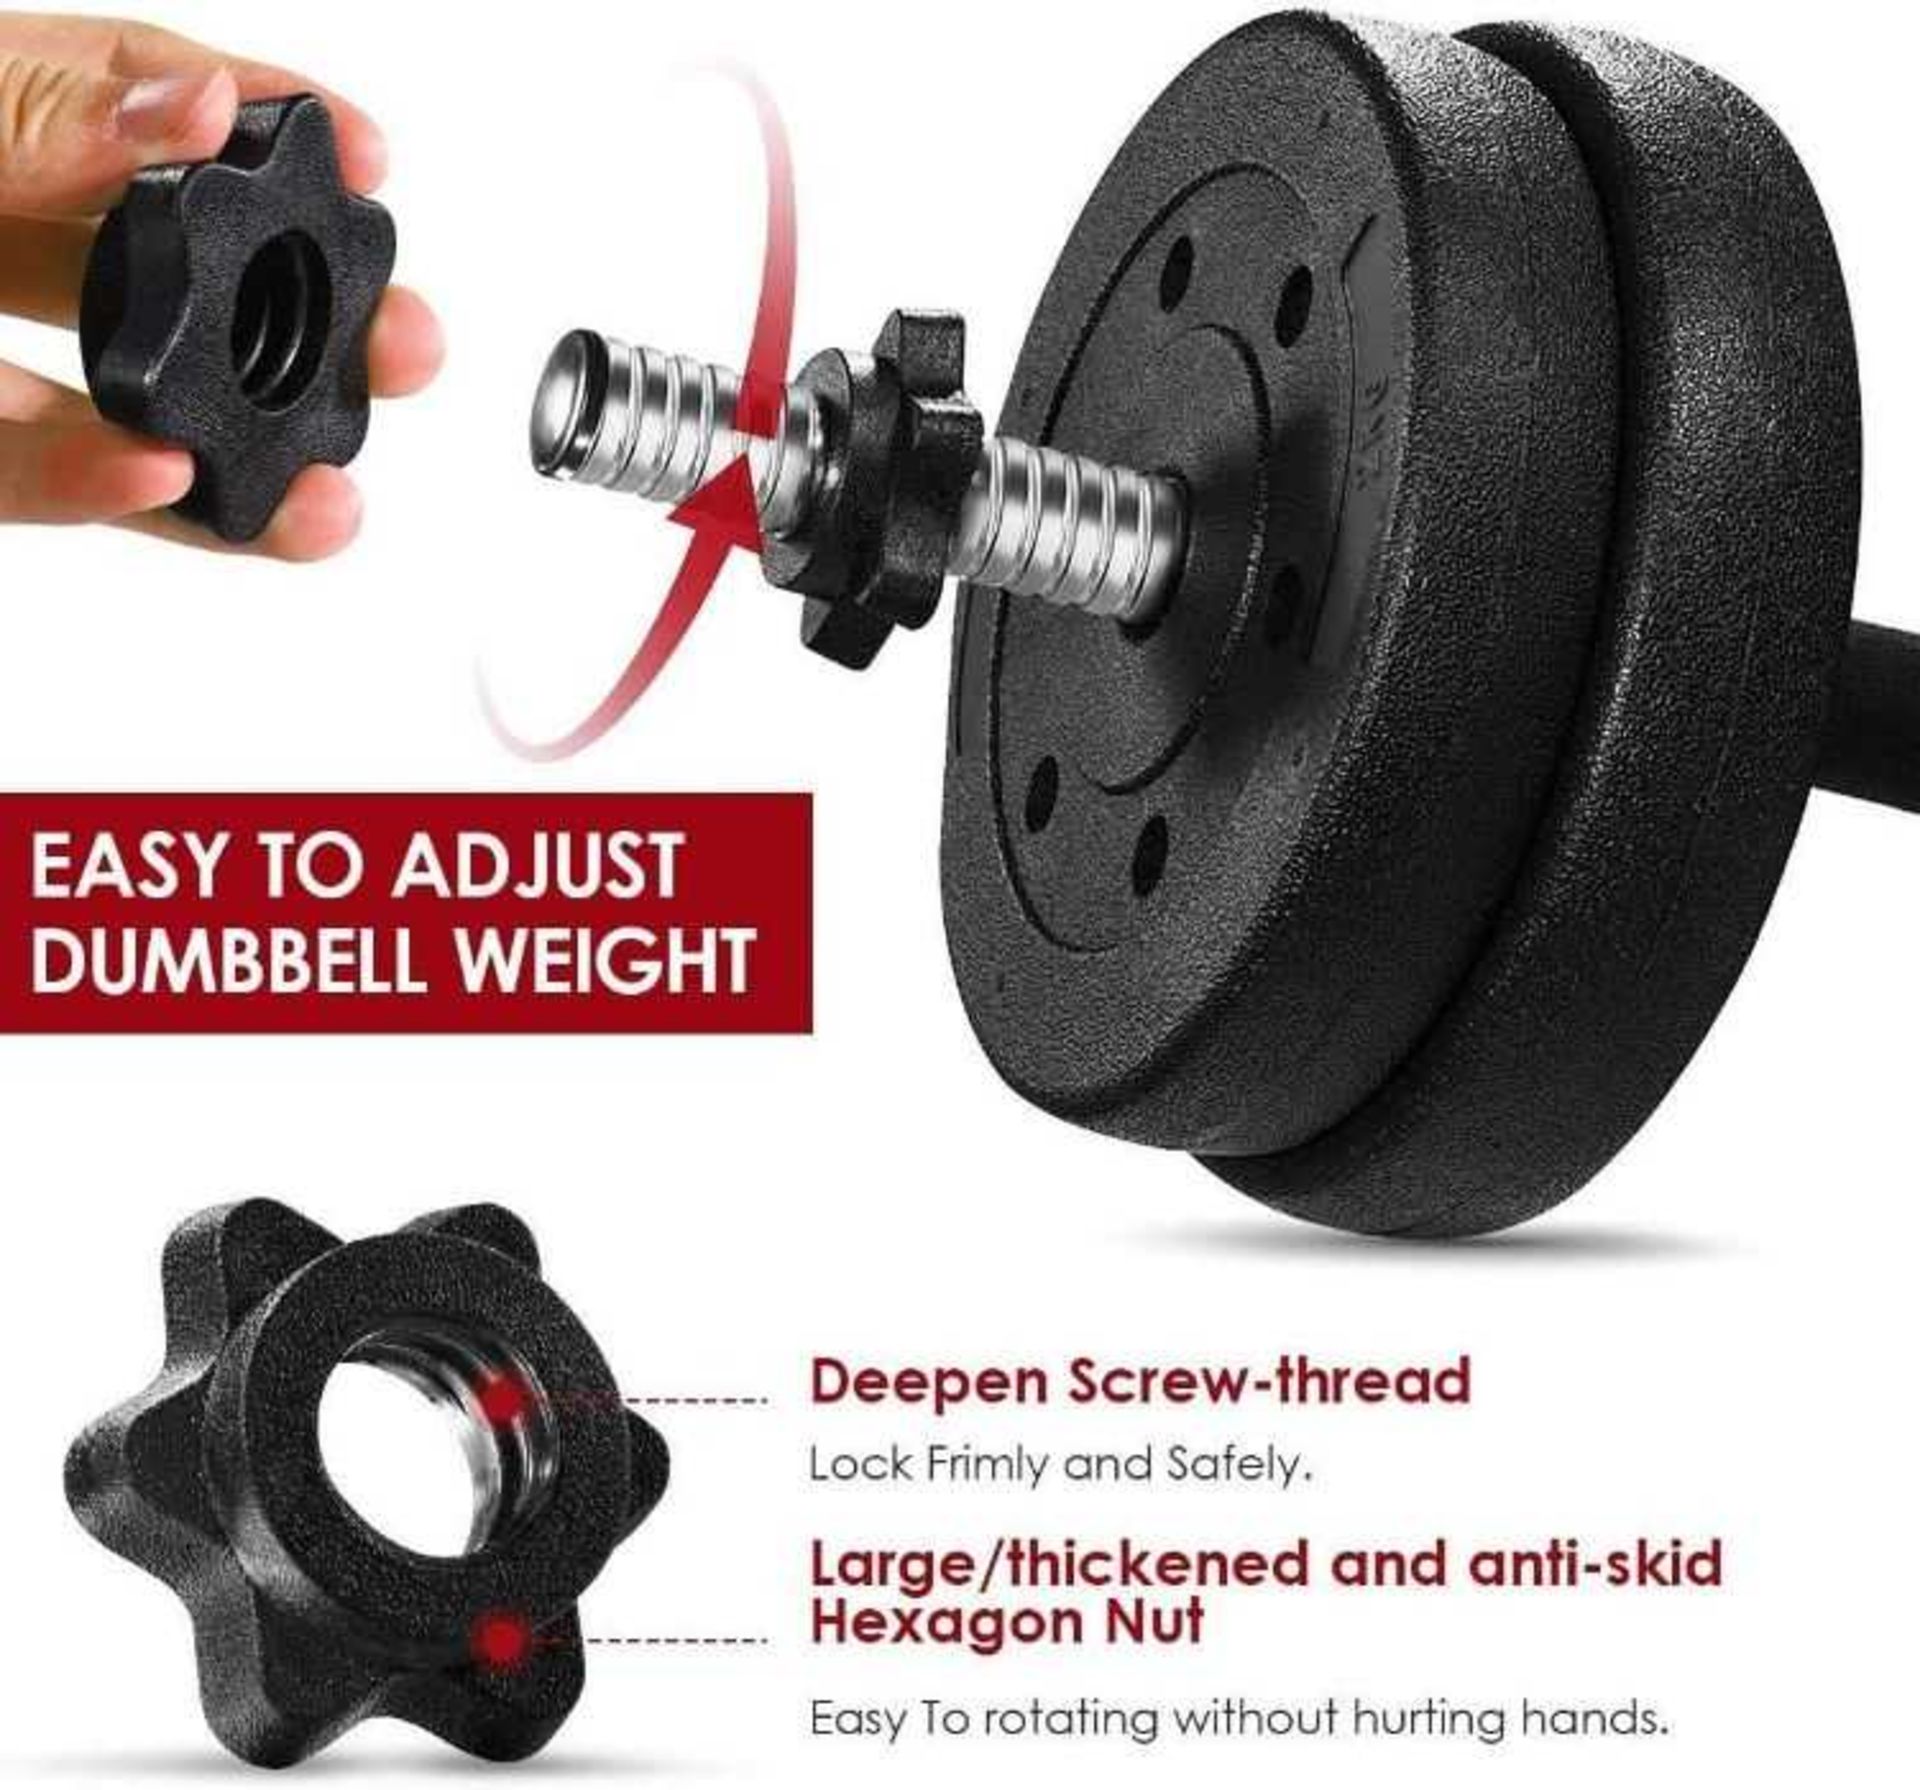 VAT 1x Movtotop 30KG adjustable Dumb Bell weight set, new and boxed, we can only find these in - Image 3 of 6